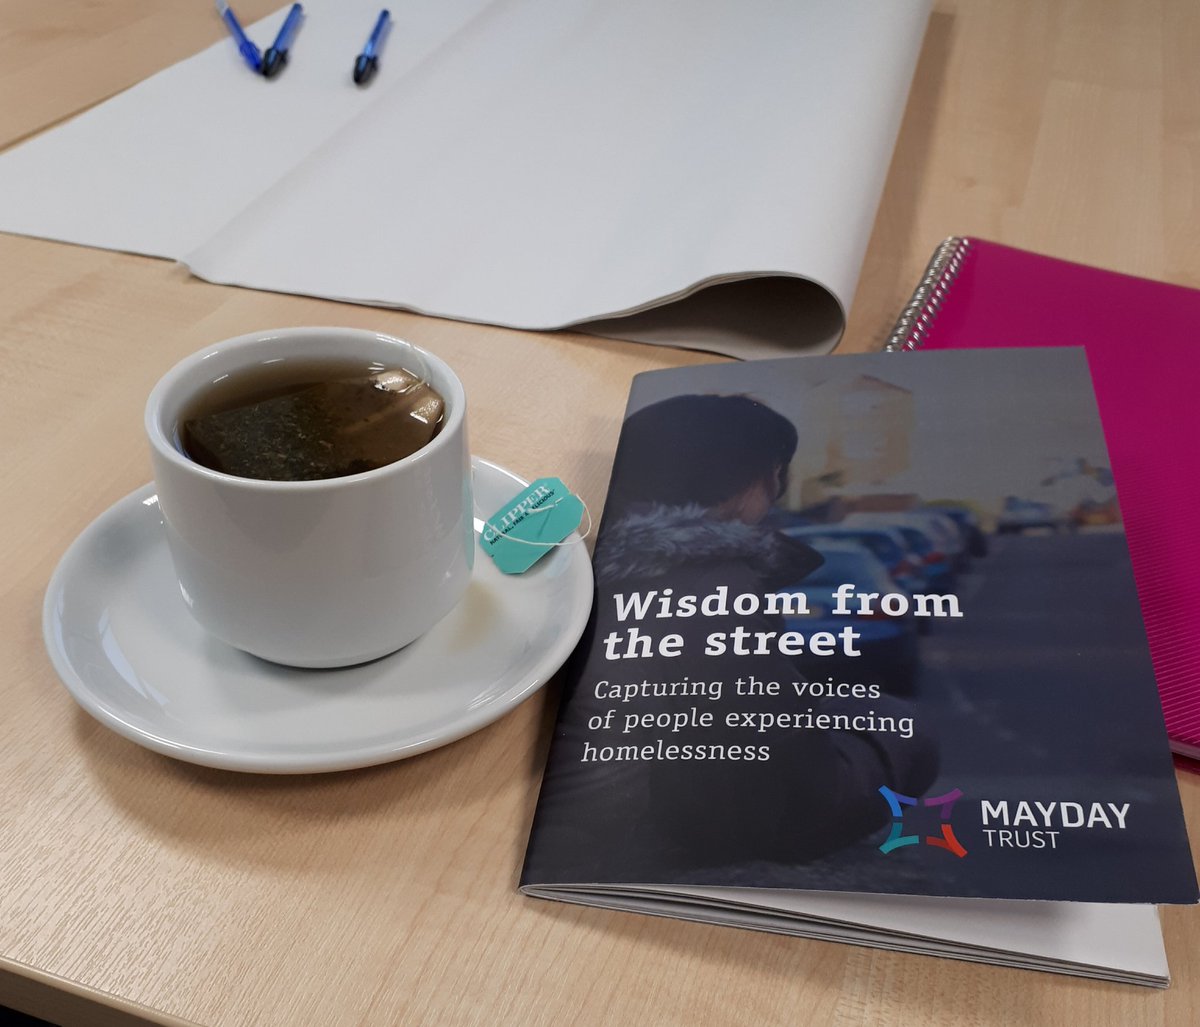 Another Tuesday, another inspirational day for change @MaydayTrust coaches training in Westminster #MDstrength #systemchange #frontline